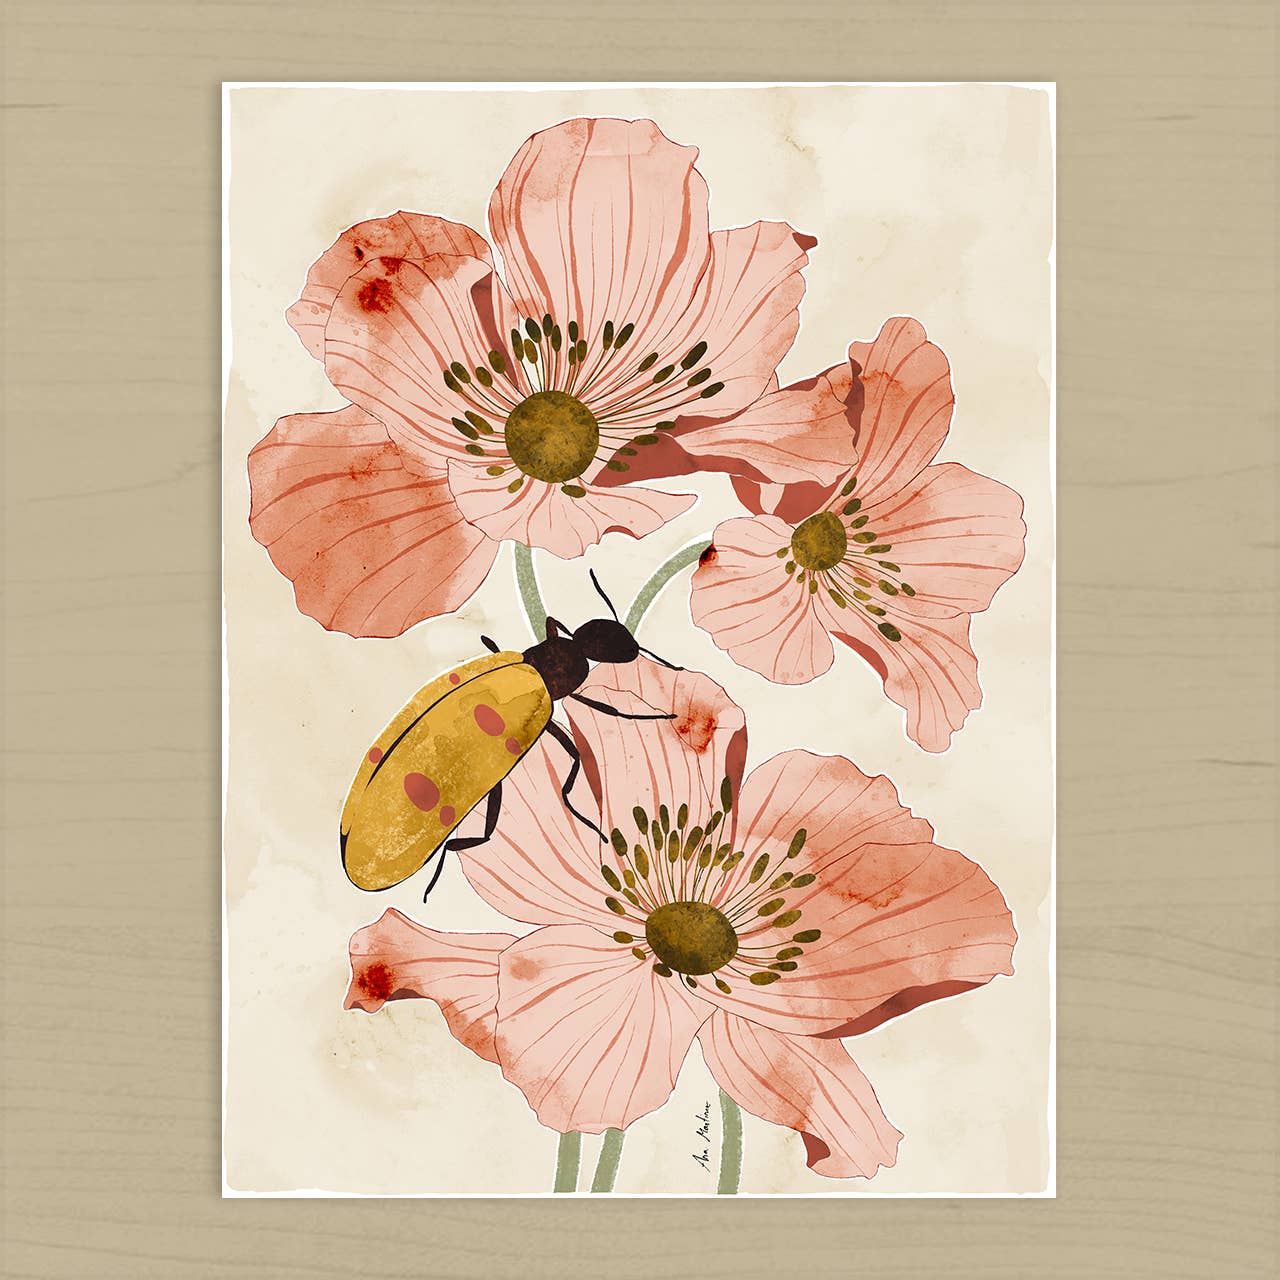 Flowers and Insects Art Print 21x30cm - Moon Room Shop and Wellness